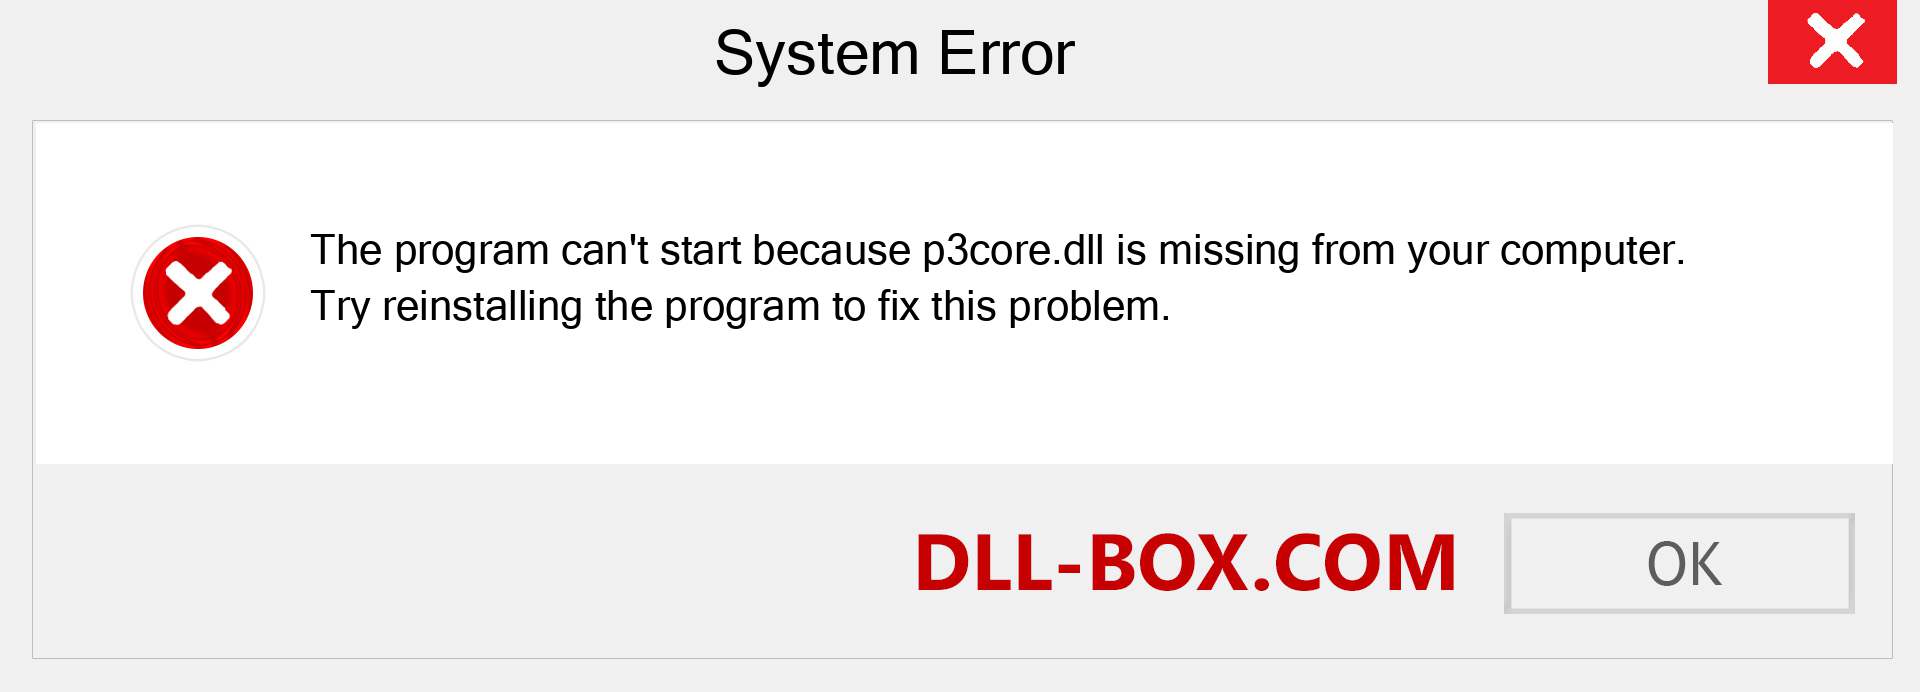  p3core.dll file is missing?. Download for Windows 7, 8, 10 - Fix  p3core dll Missing Error on Windows, photos, images